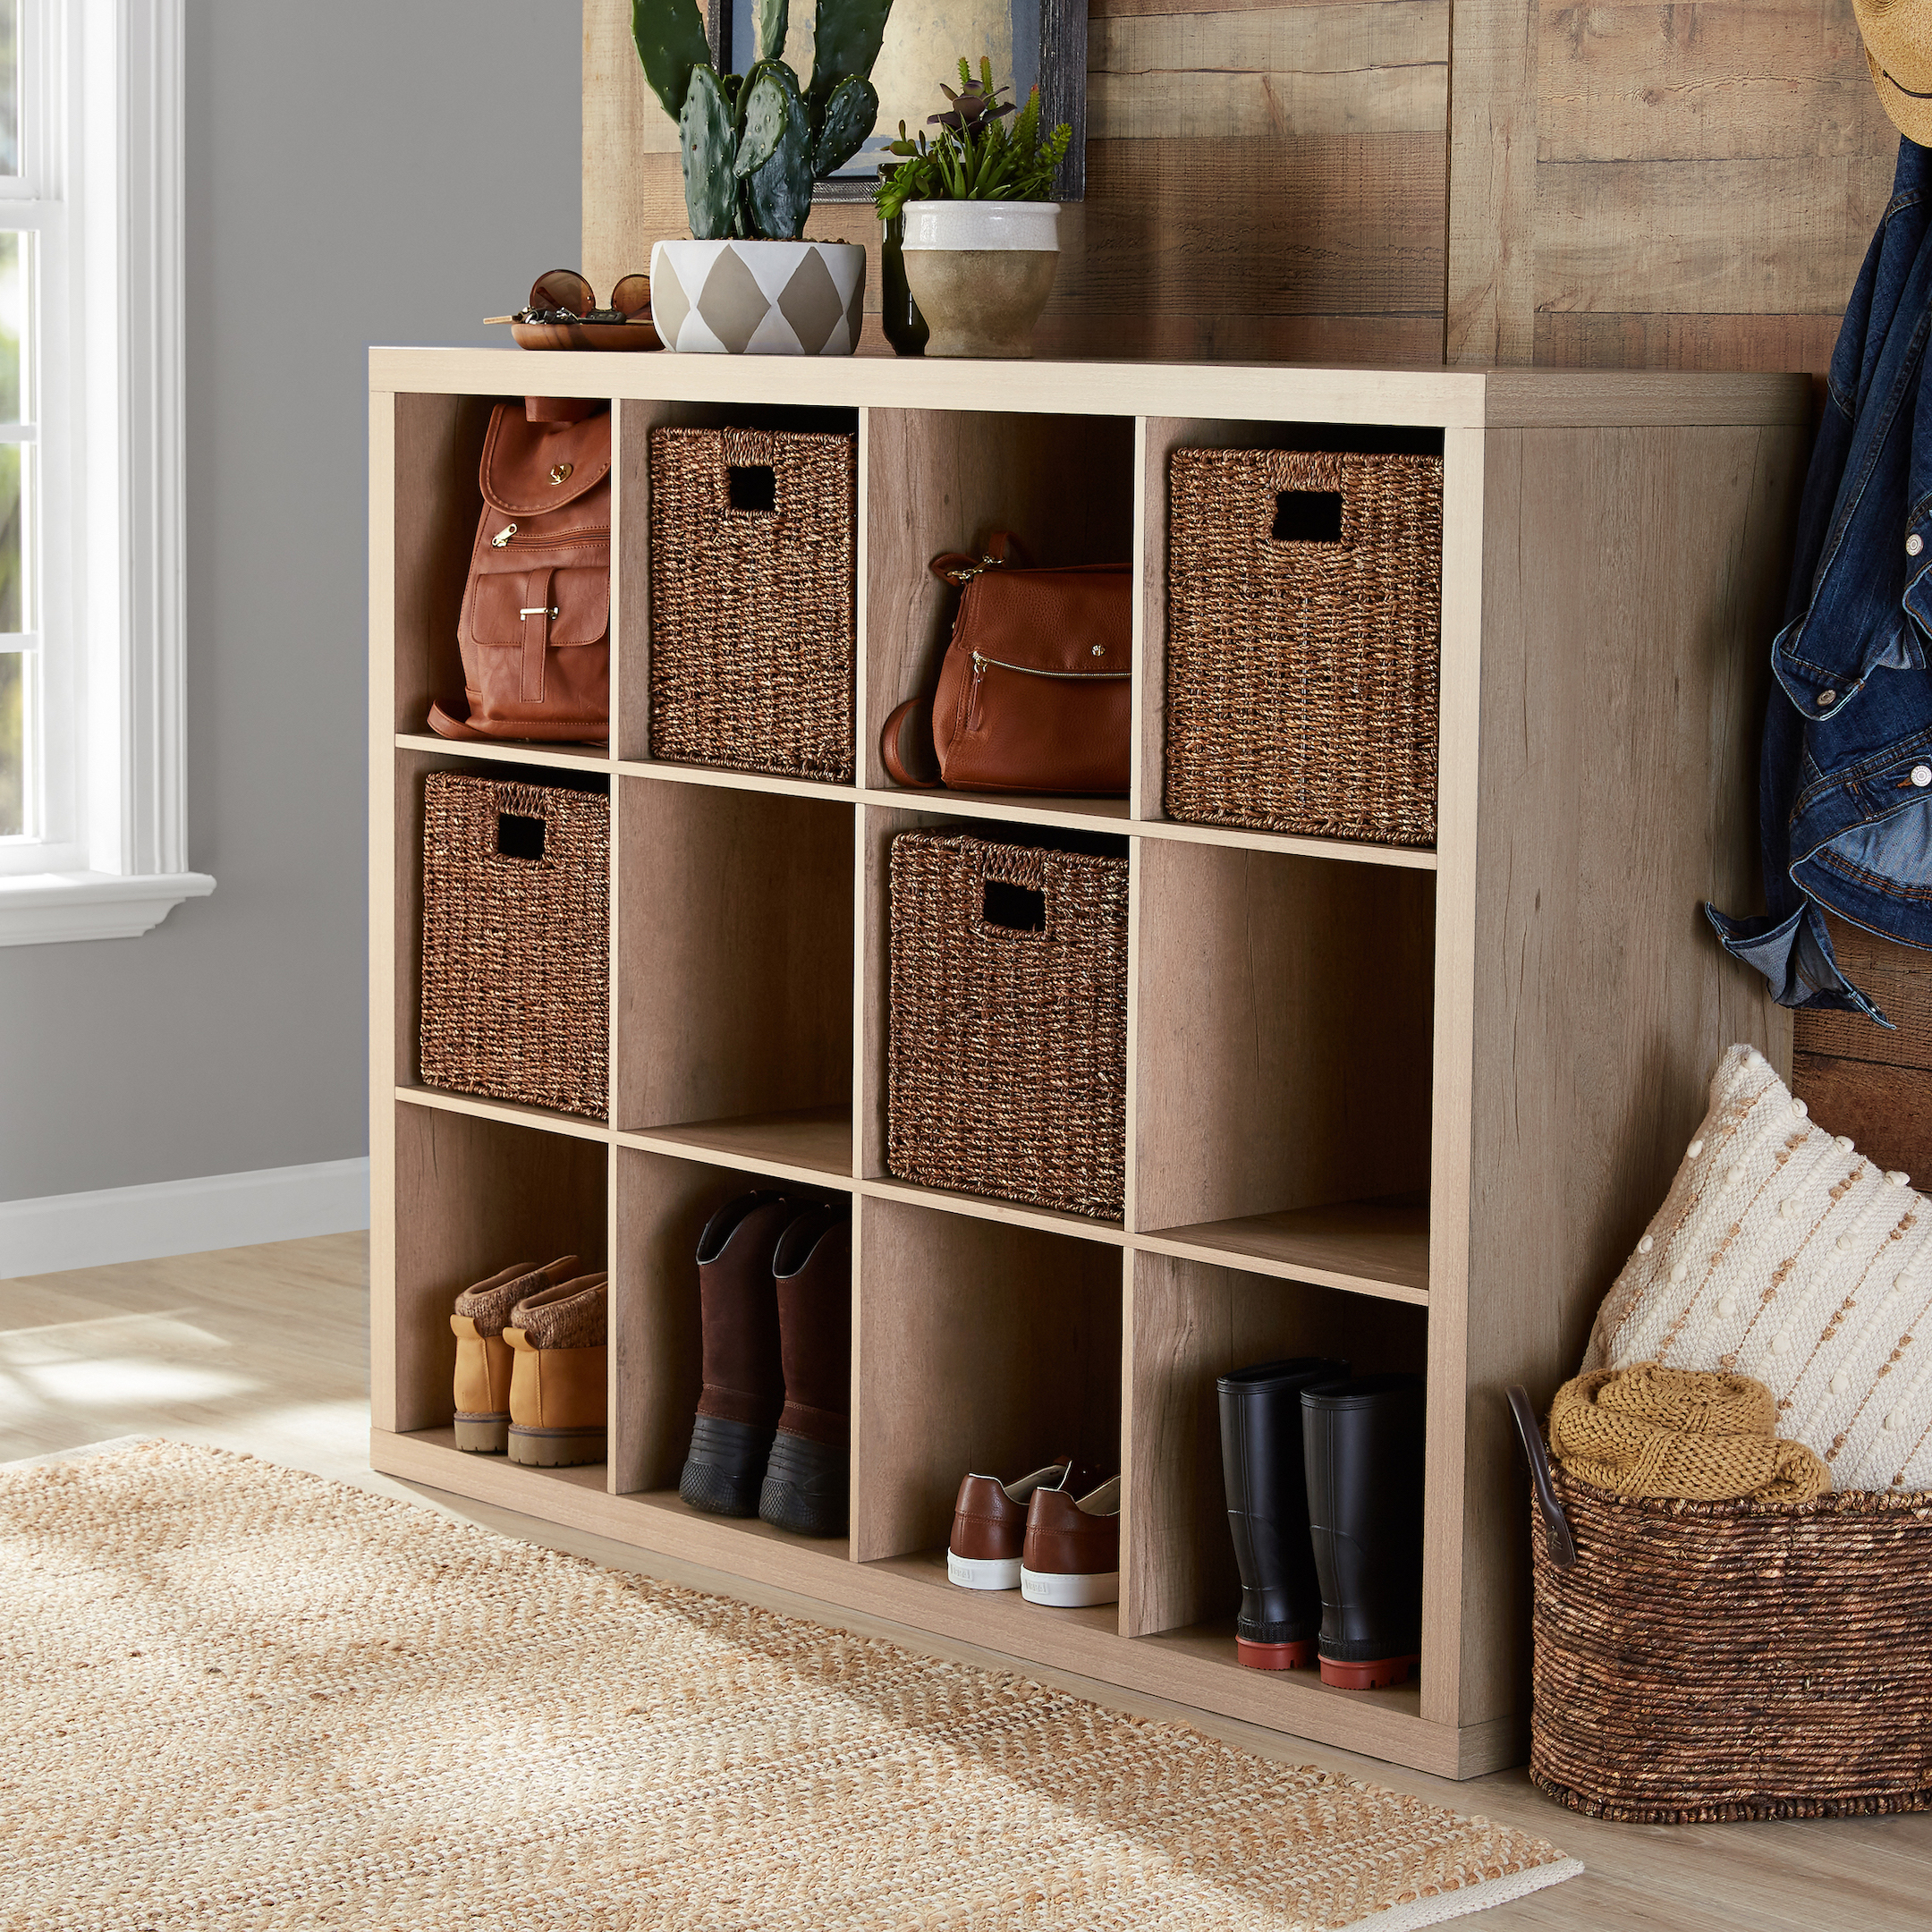 Better Homes & Gardens 12-Cube Storage Organizer, Natural - image 2 of 6